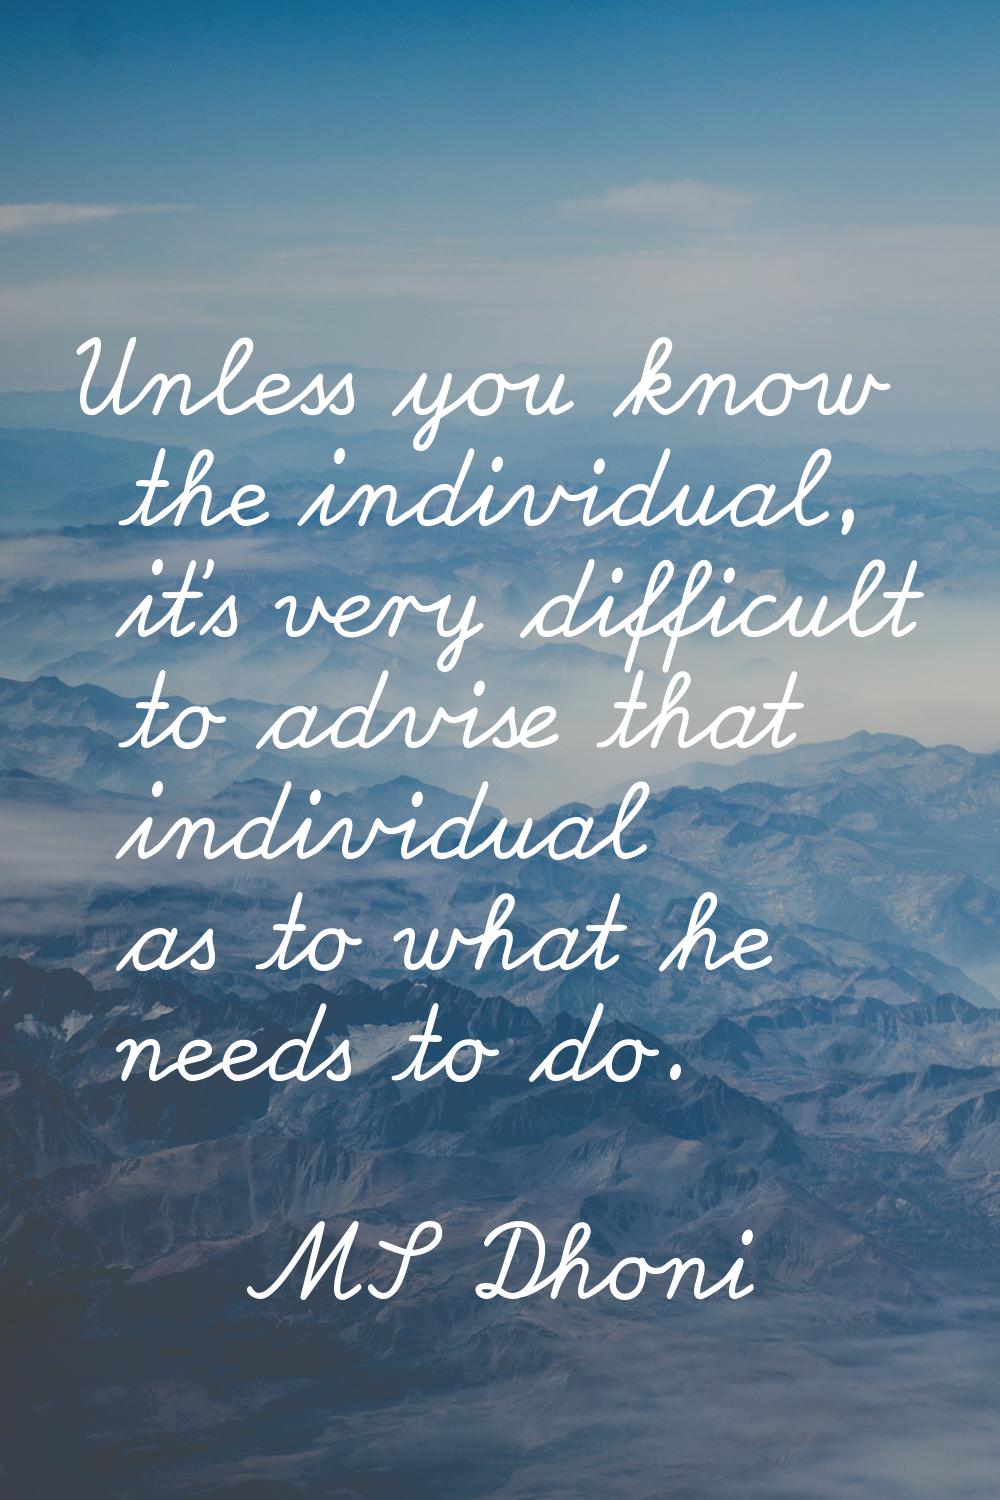 Unless you know the individual, it's very difficult to advise that individual as to what he needs t